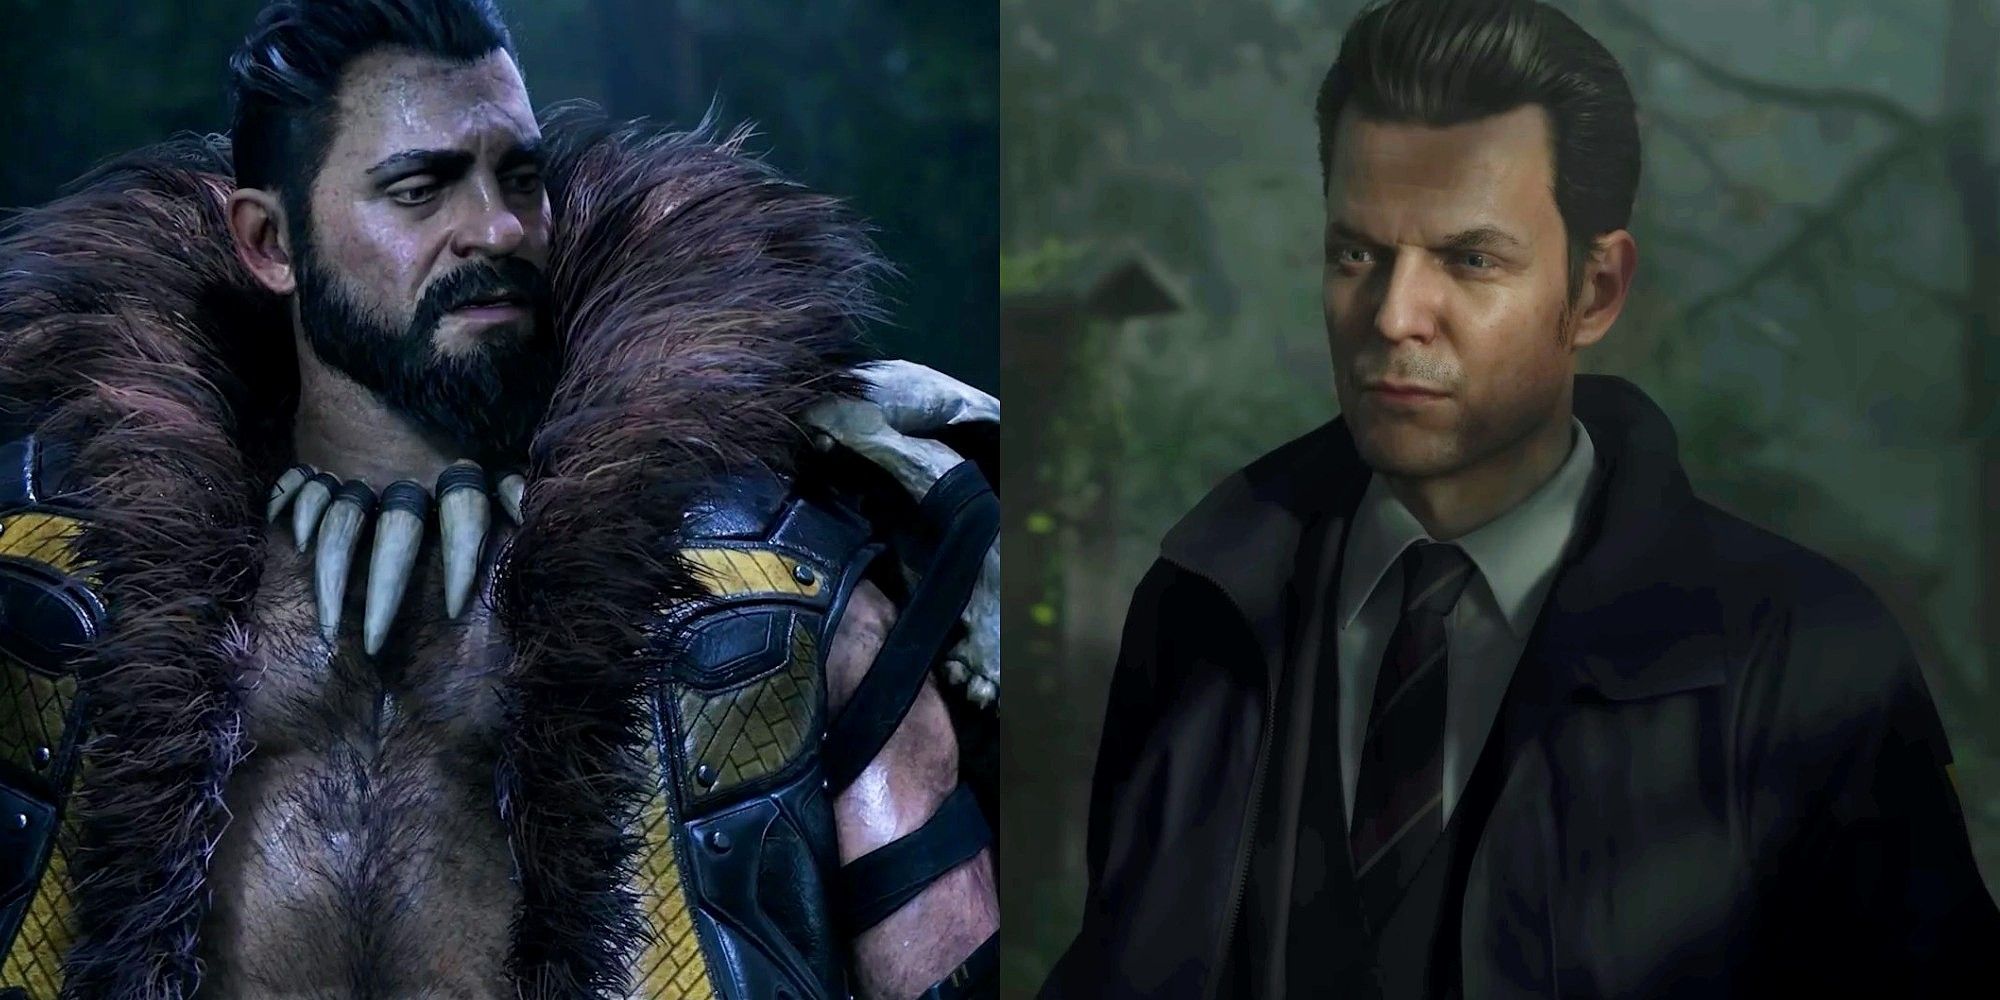 Kraven The Hunter From Marvel's Spider-Man 2 And Sam Lake's Character From Alan Wake 2